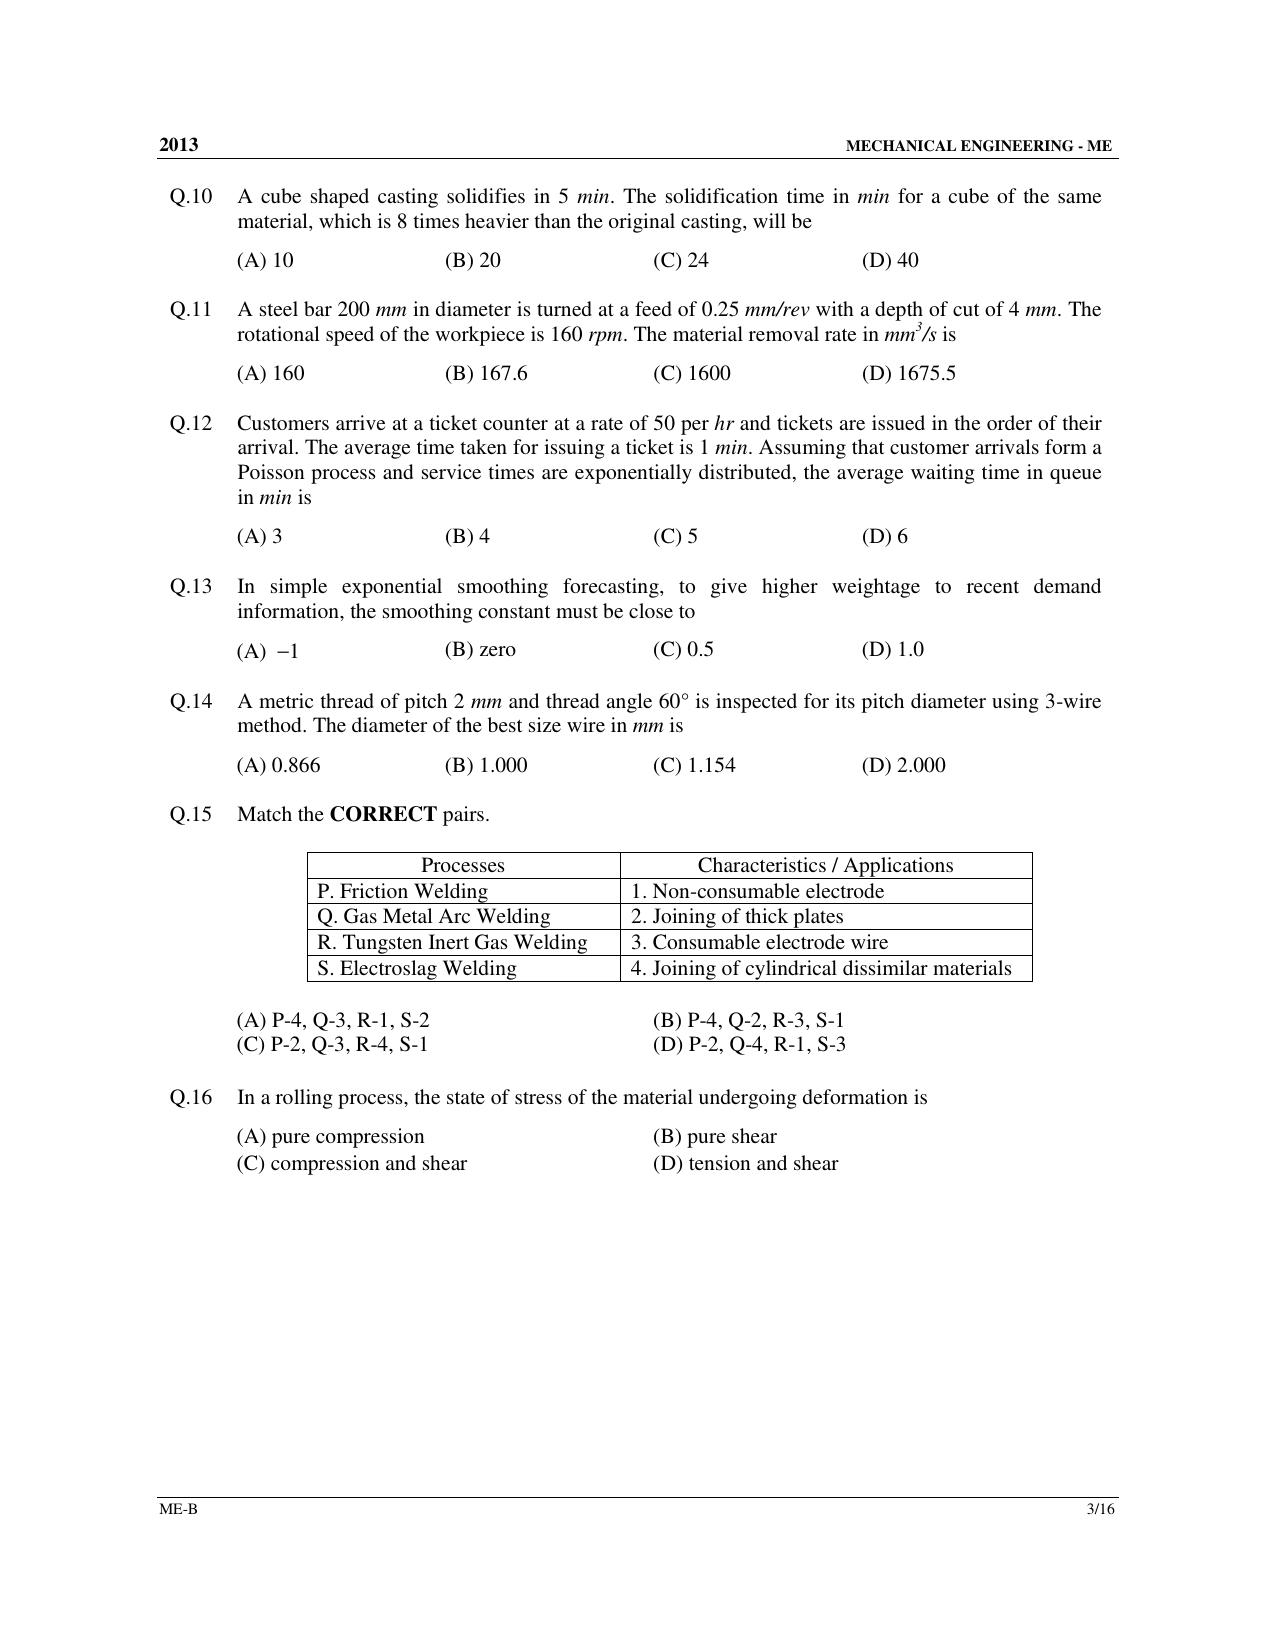 GATE 2013 Mechanical Engineering (ME) Question Paper with Answer Key - Page 18